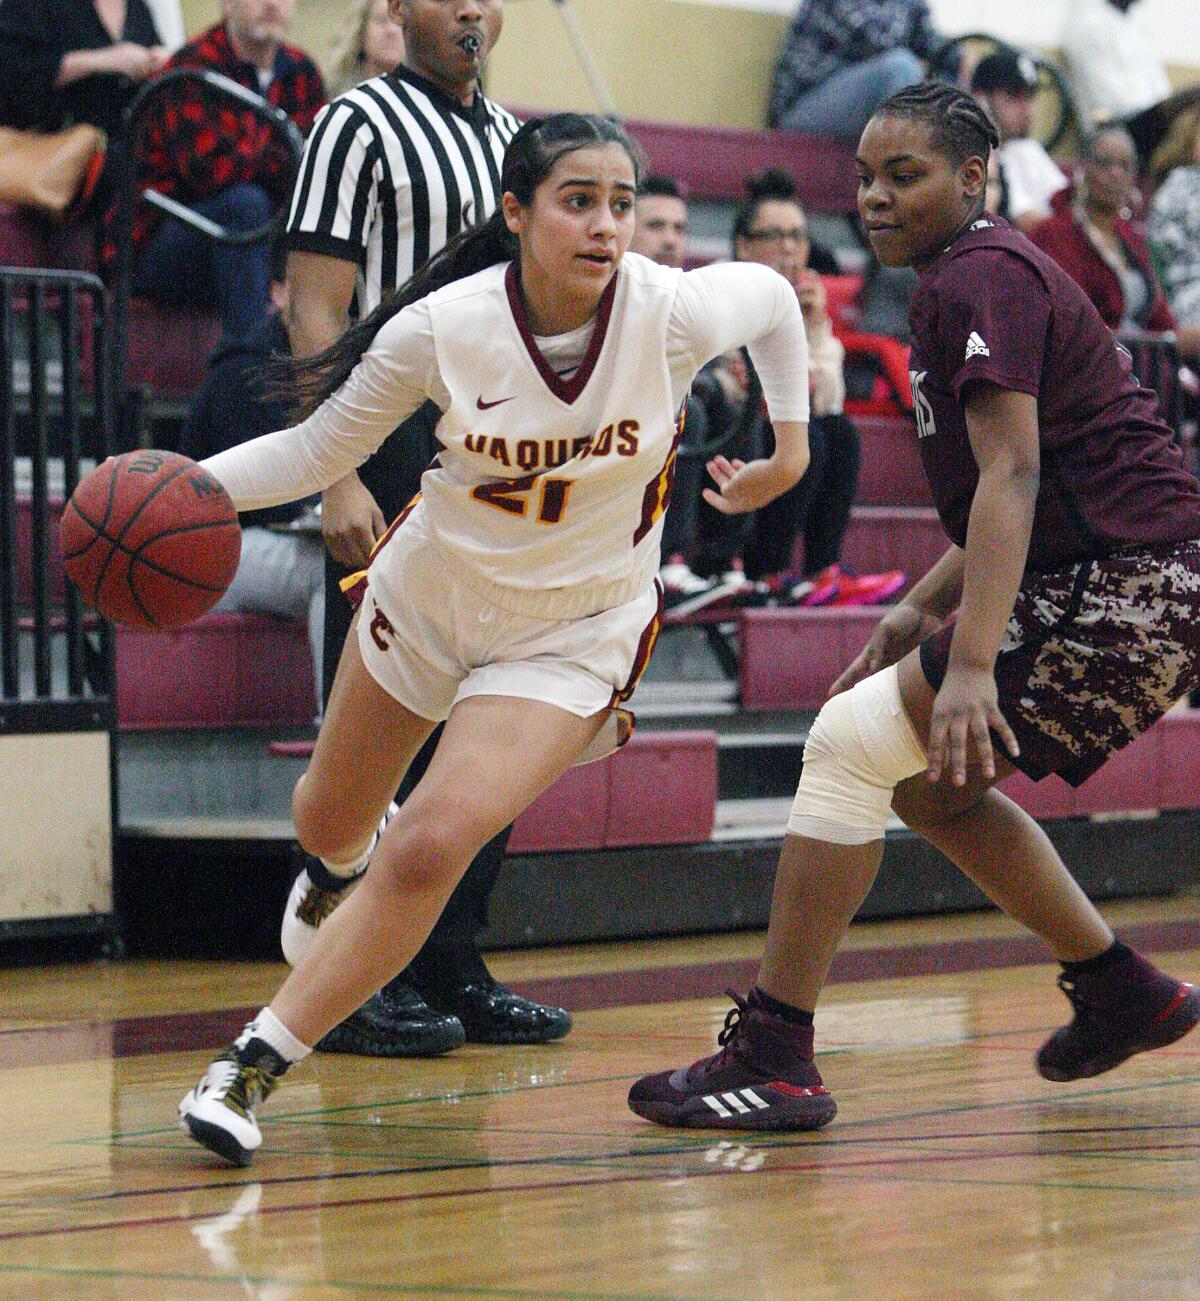 Glendale Community College's Zoe Rouse cuts and dribbles around Antelope Valley's Niyah Page in a Western State Conference women's basketball game at Glendale Community College on Wednesday, January 22, 2020.